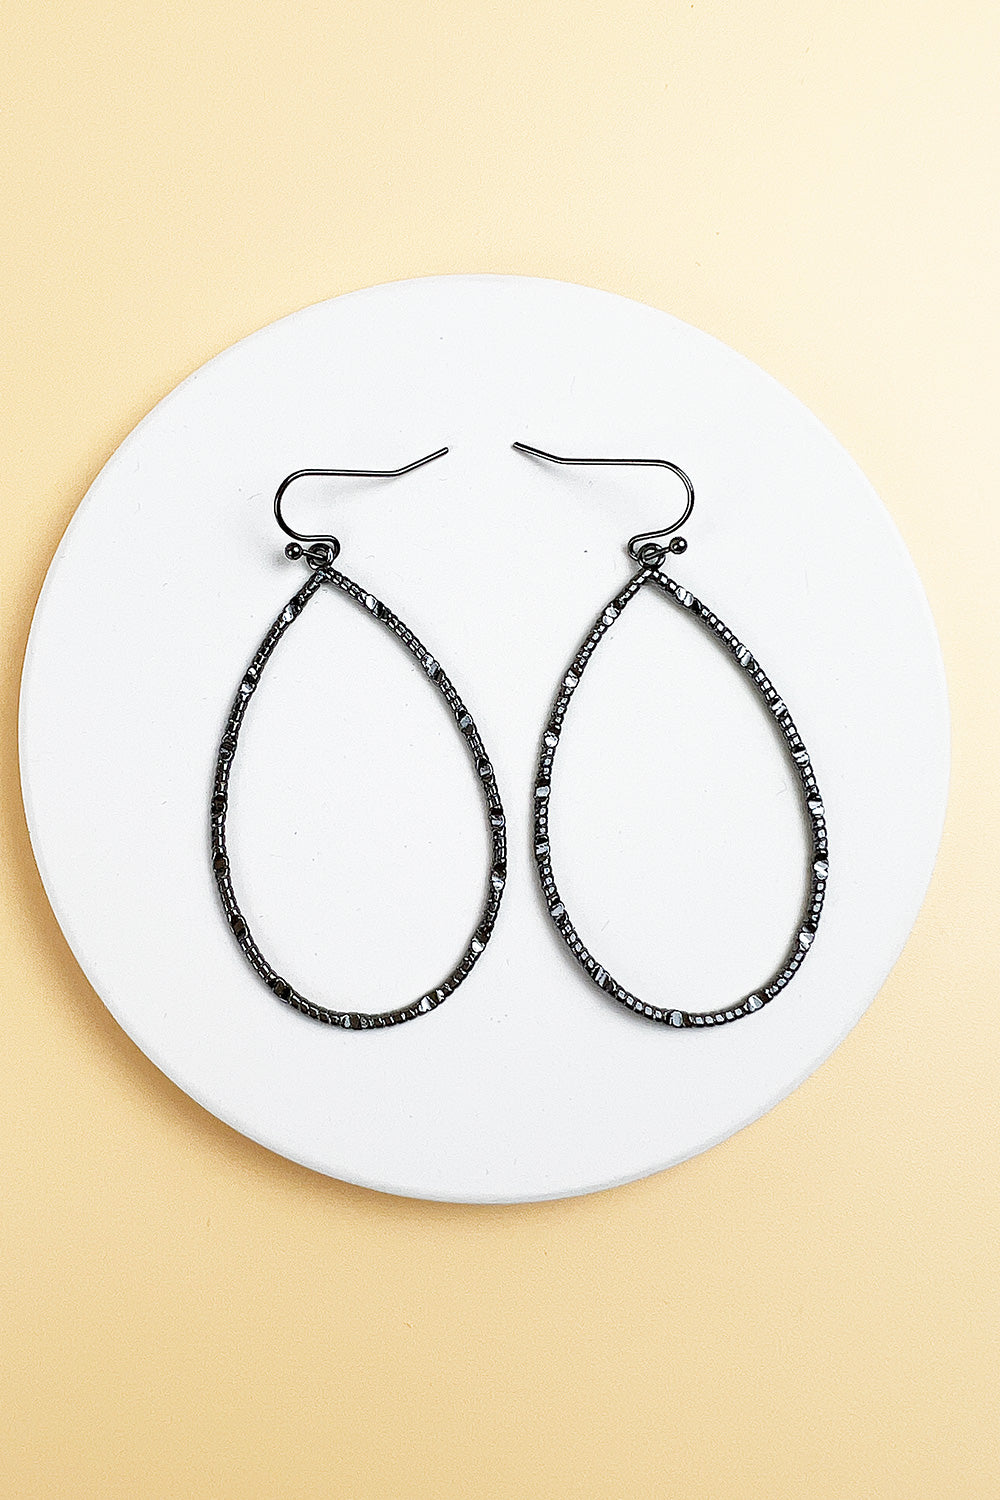 2.5" TEXTURED WIRE EARRINGS